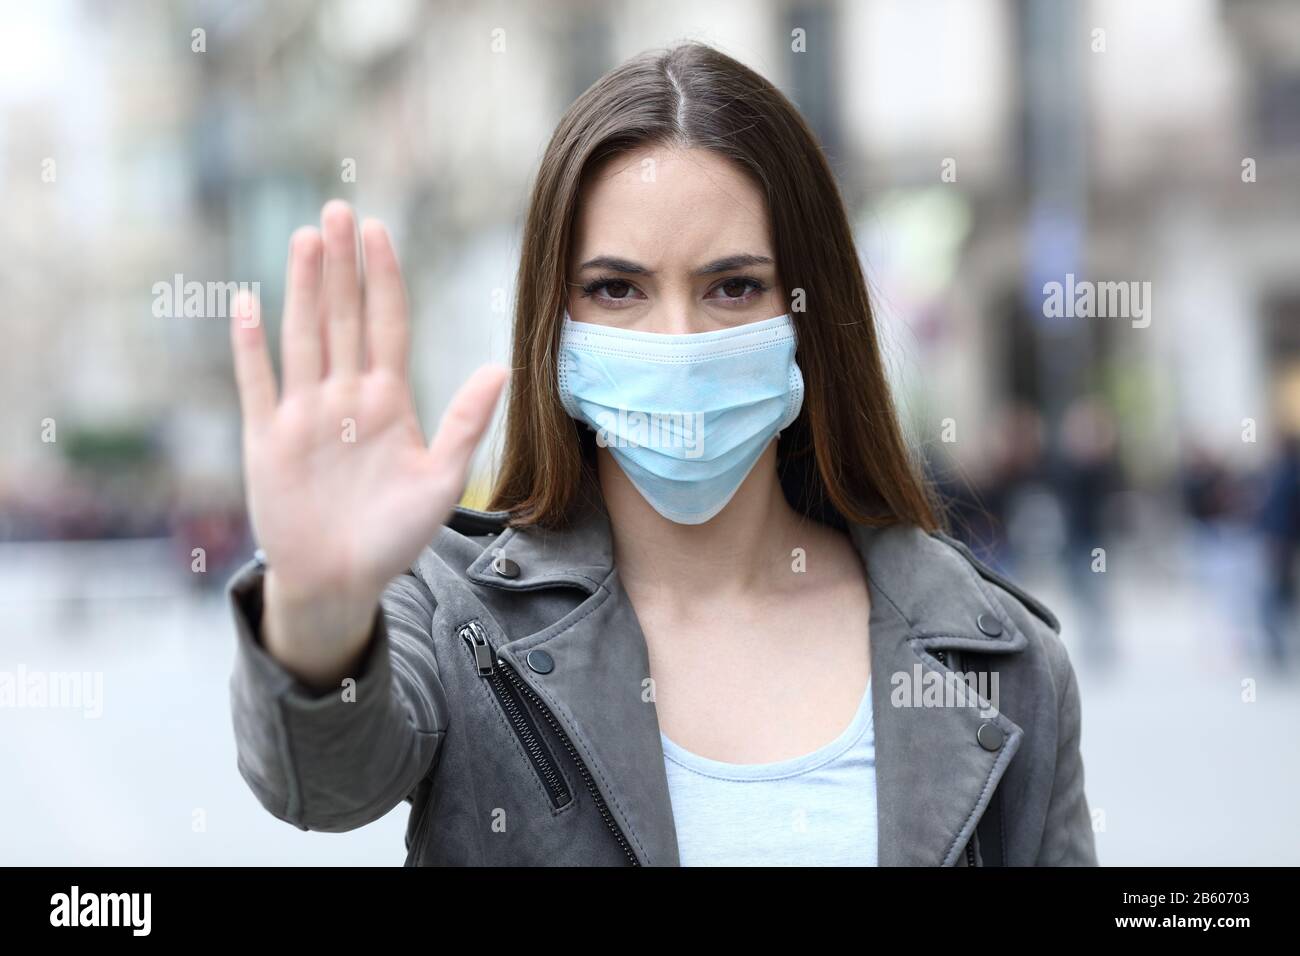 Front view portrait of a serious girl doing stop sign gesture with protective mask on city street Stock Photo